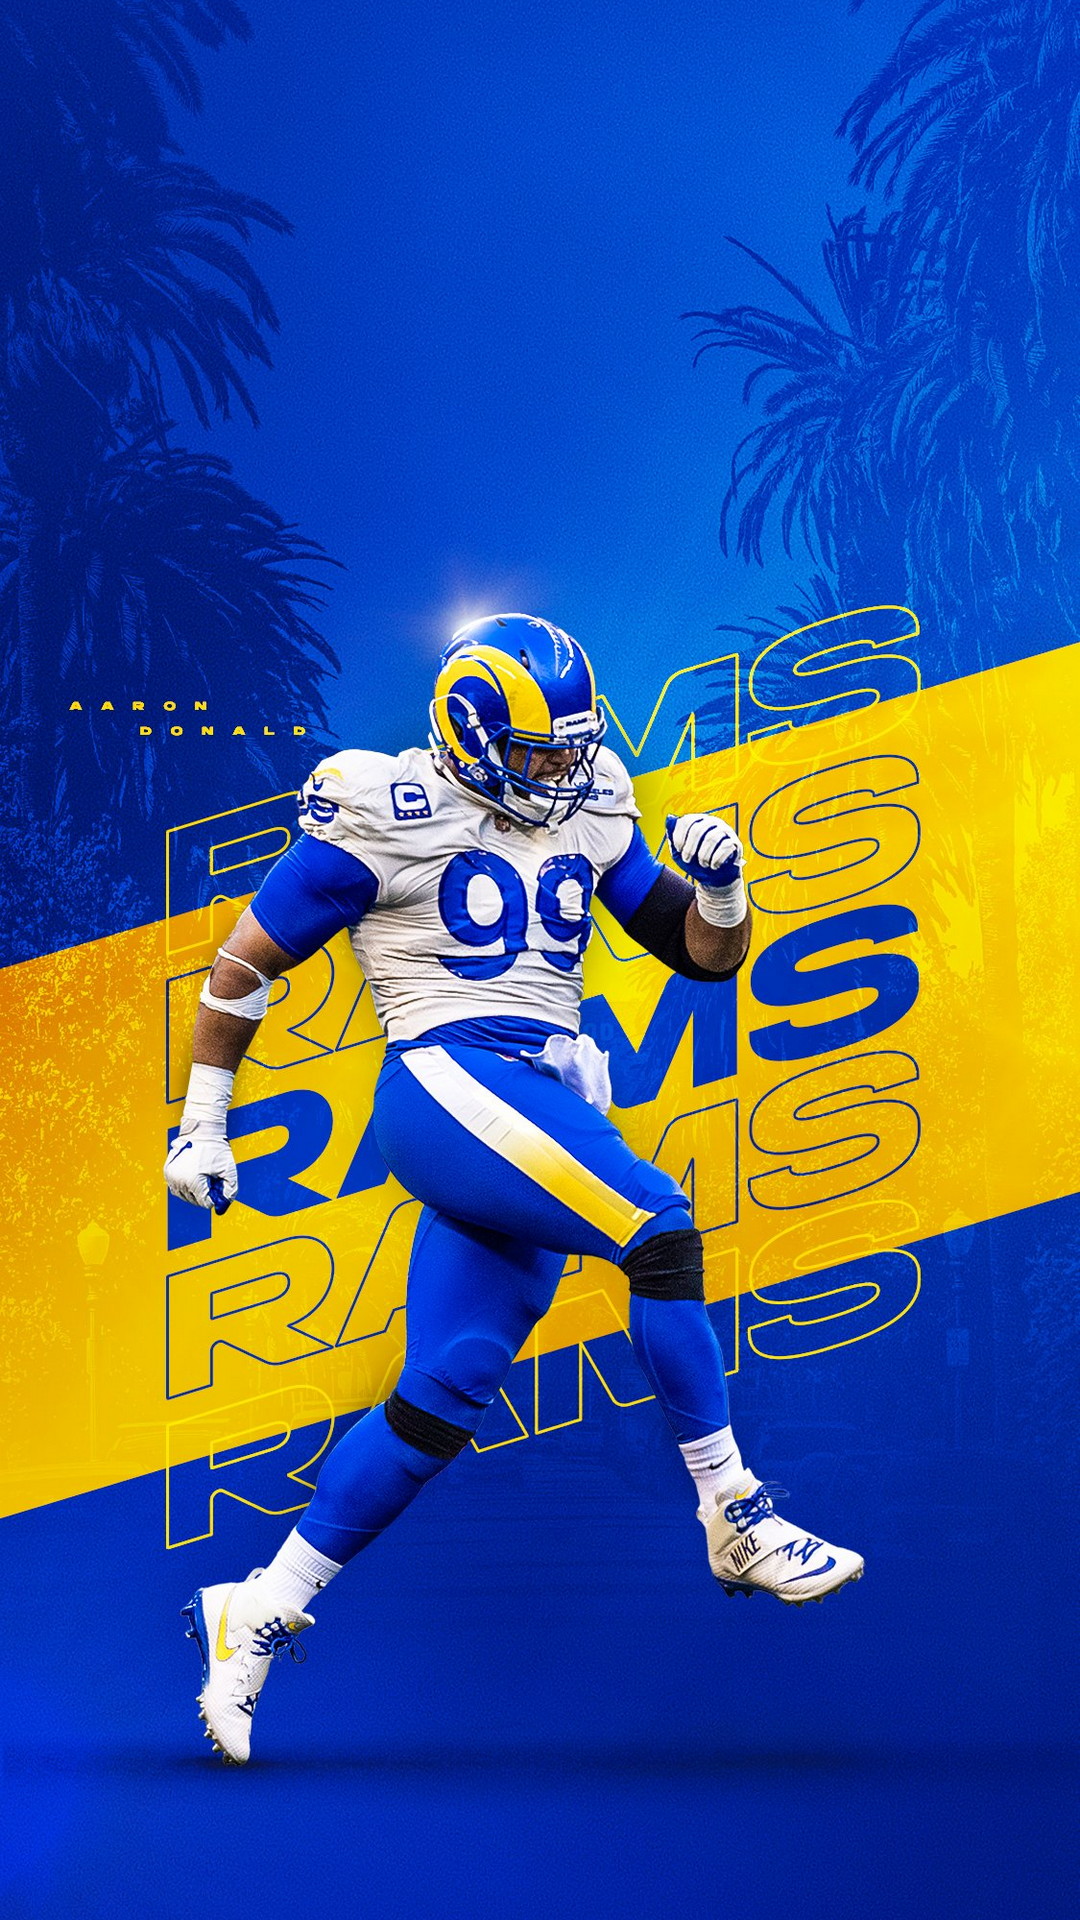 Los Angeles Rams iPhone Wallpaper in HD with high-resolution 1080x1920 pixel. Download and set as wallpaper for Desktop Computer, Apple iPhone X, XS Max, XR, 8, 7, 6, SE, iPad, Android